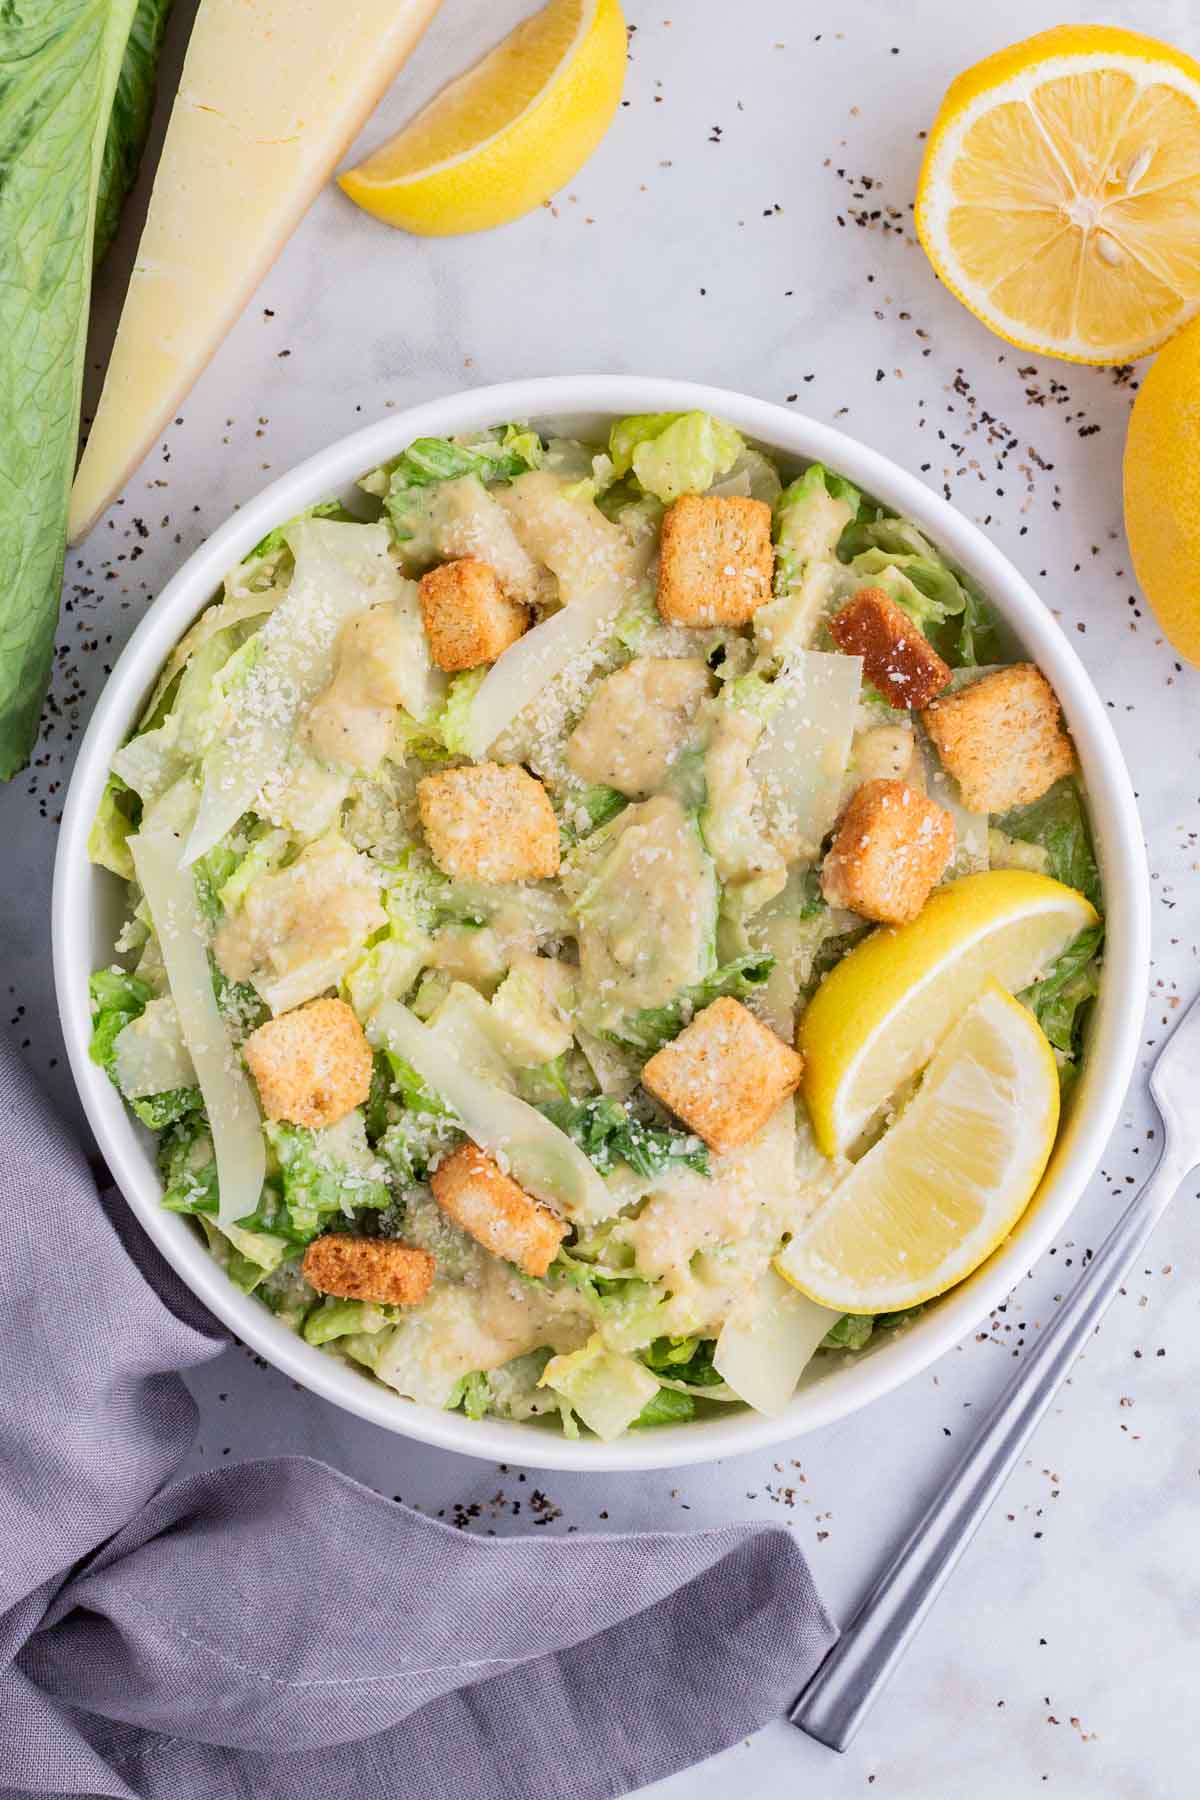 Caesar salad is topped with croutons, cheese, dressing, and a lemon.